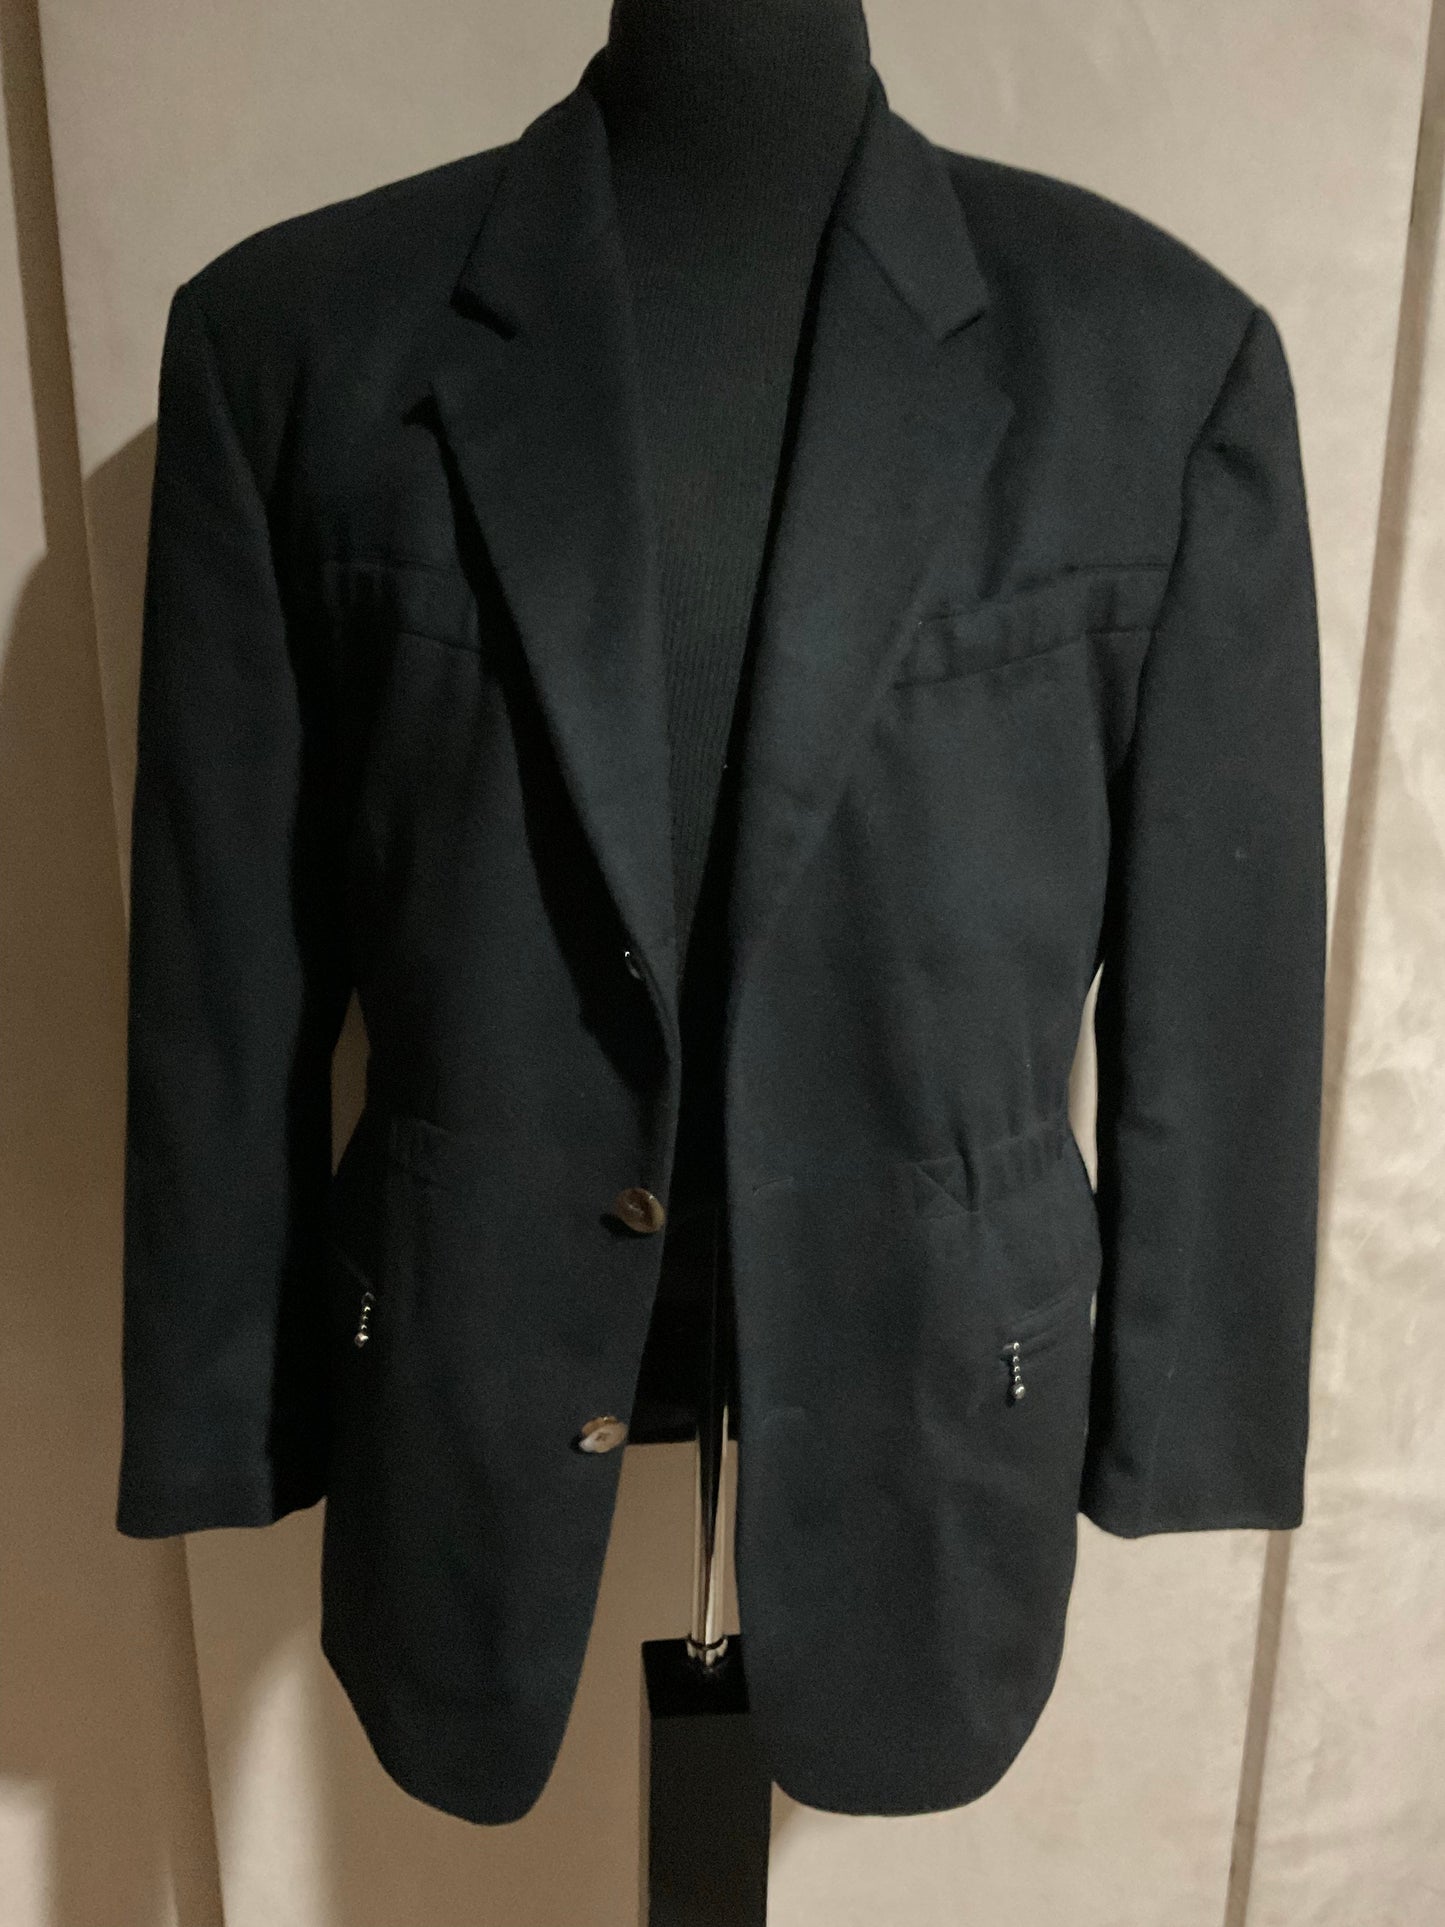 R P JACKET / BLACK CASHMERE & WOOL / MEDIUM - 40 / NEW / MADE IN GERMANY